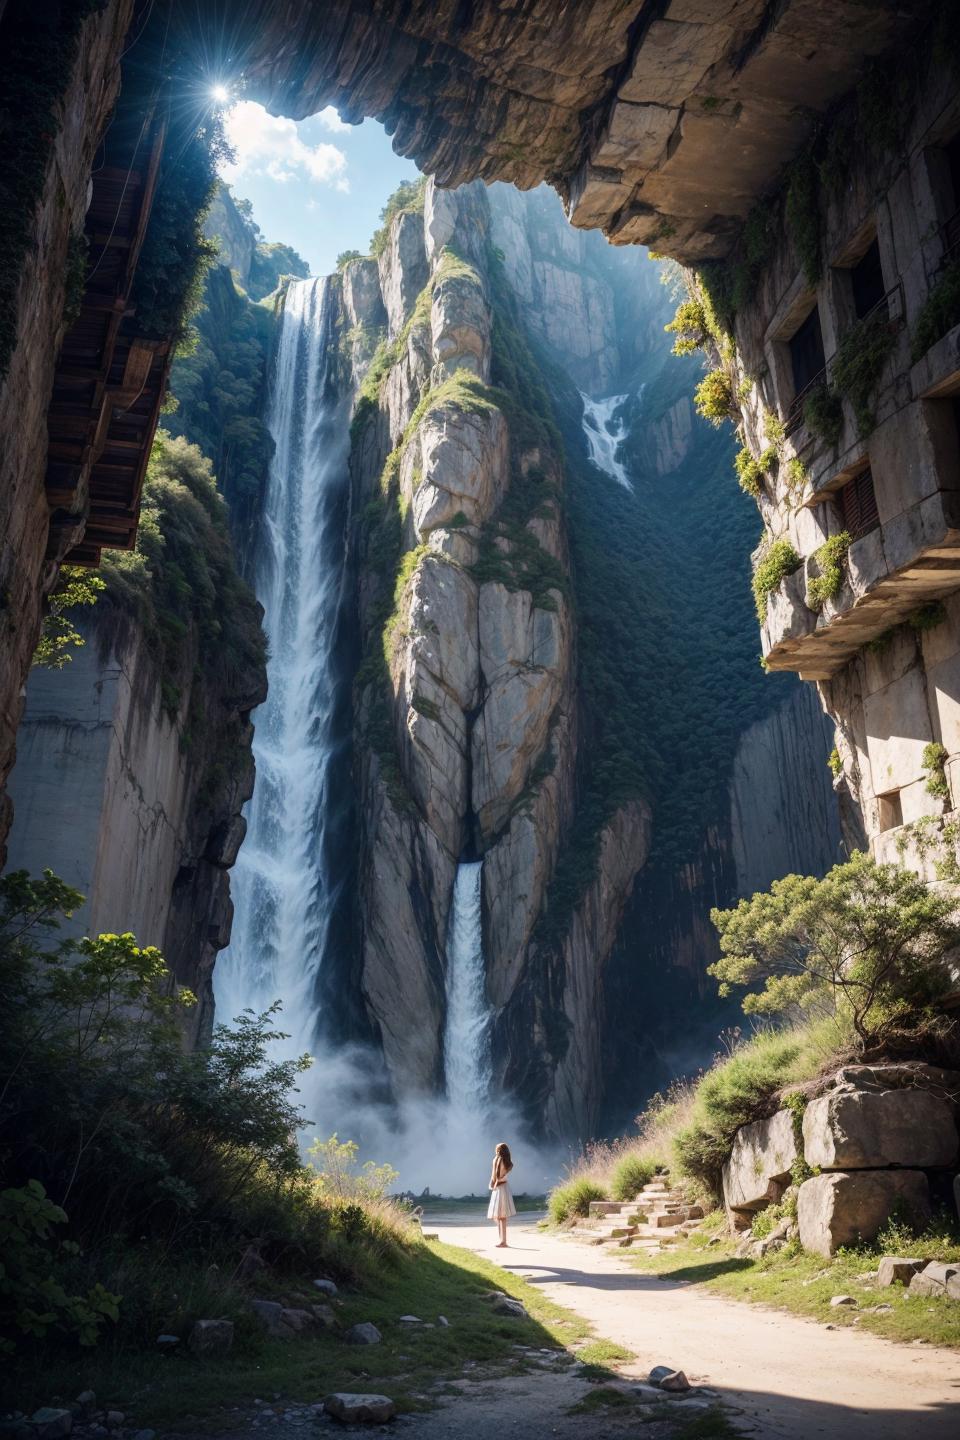 A woman standing in front of a massive waterfall with a mountain backdrop.